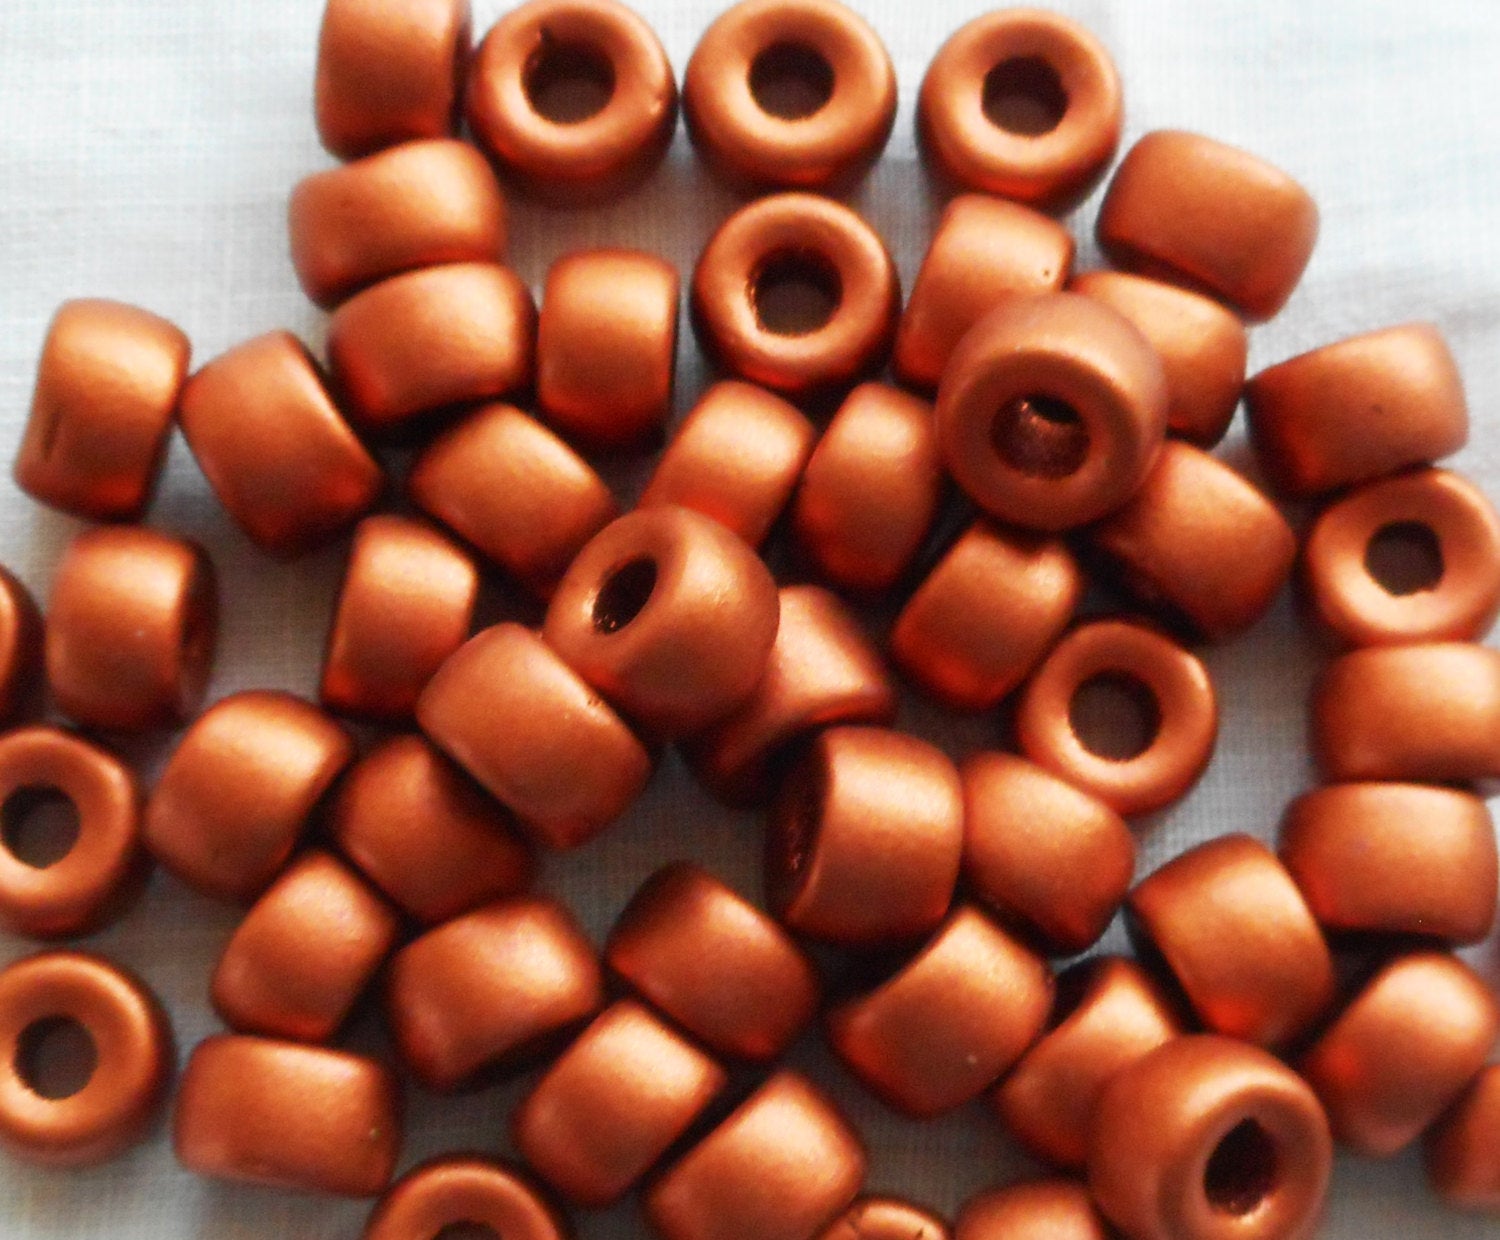 Thebeadchest Copper Round 9mm Beads, Full Strand of Quality Metal Spacers for DIY Jewelry Design, Adult Unisex, Bronze